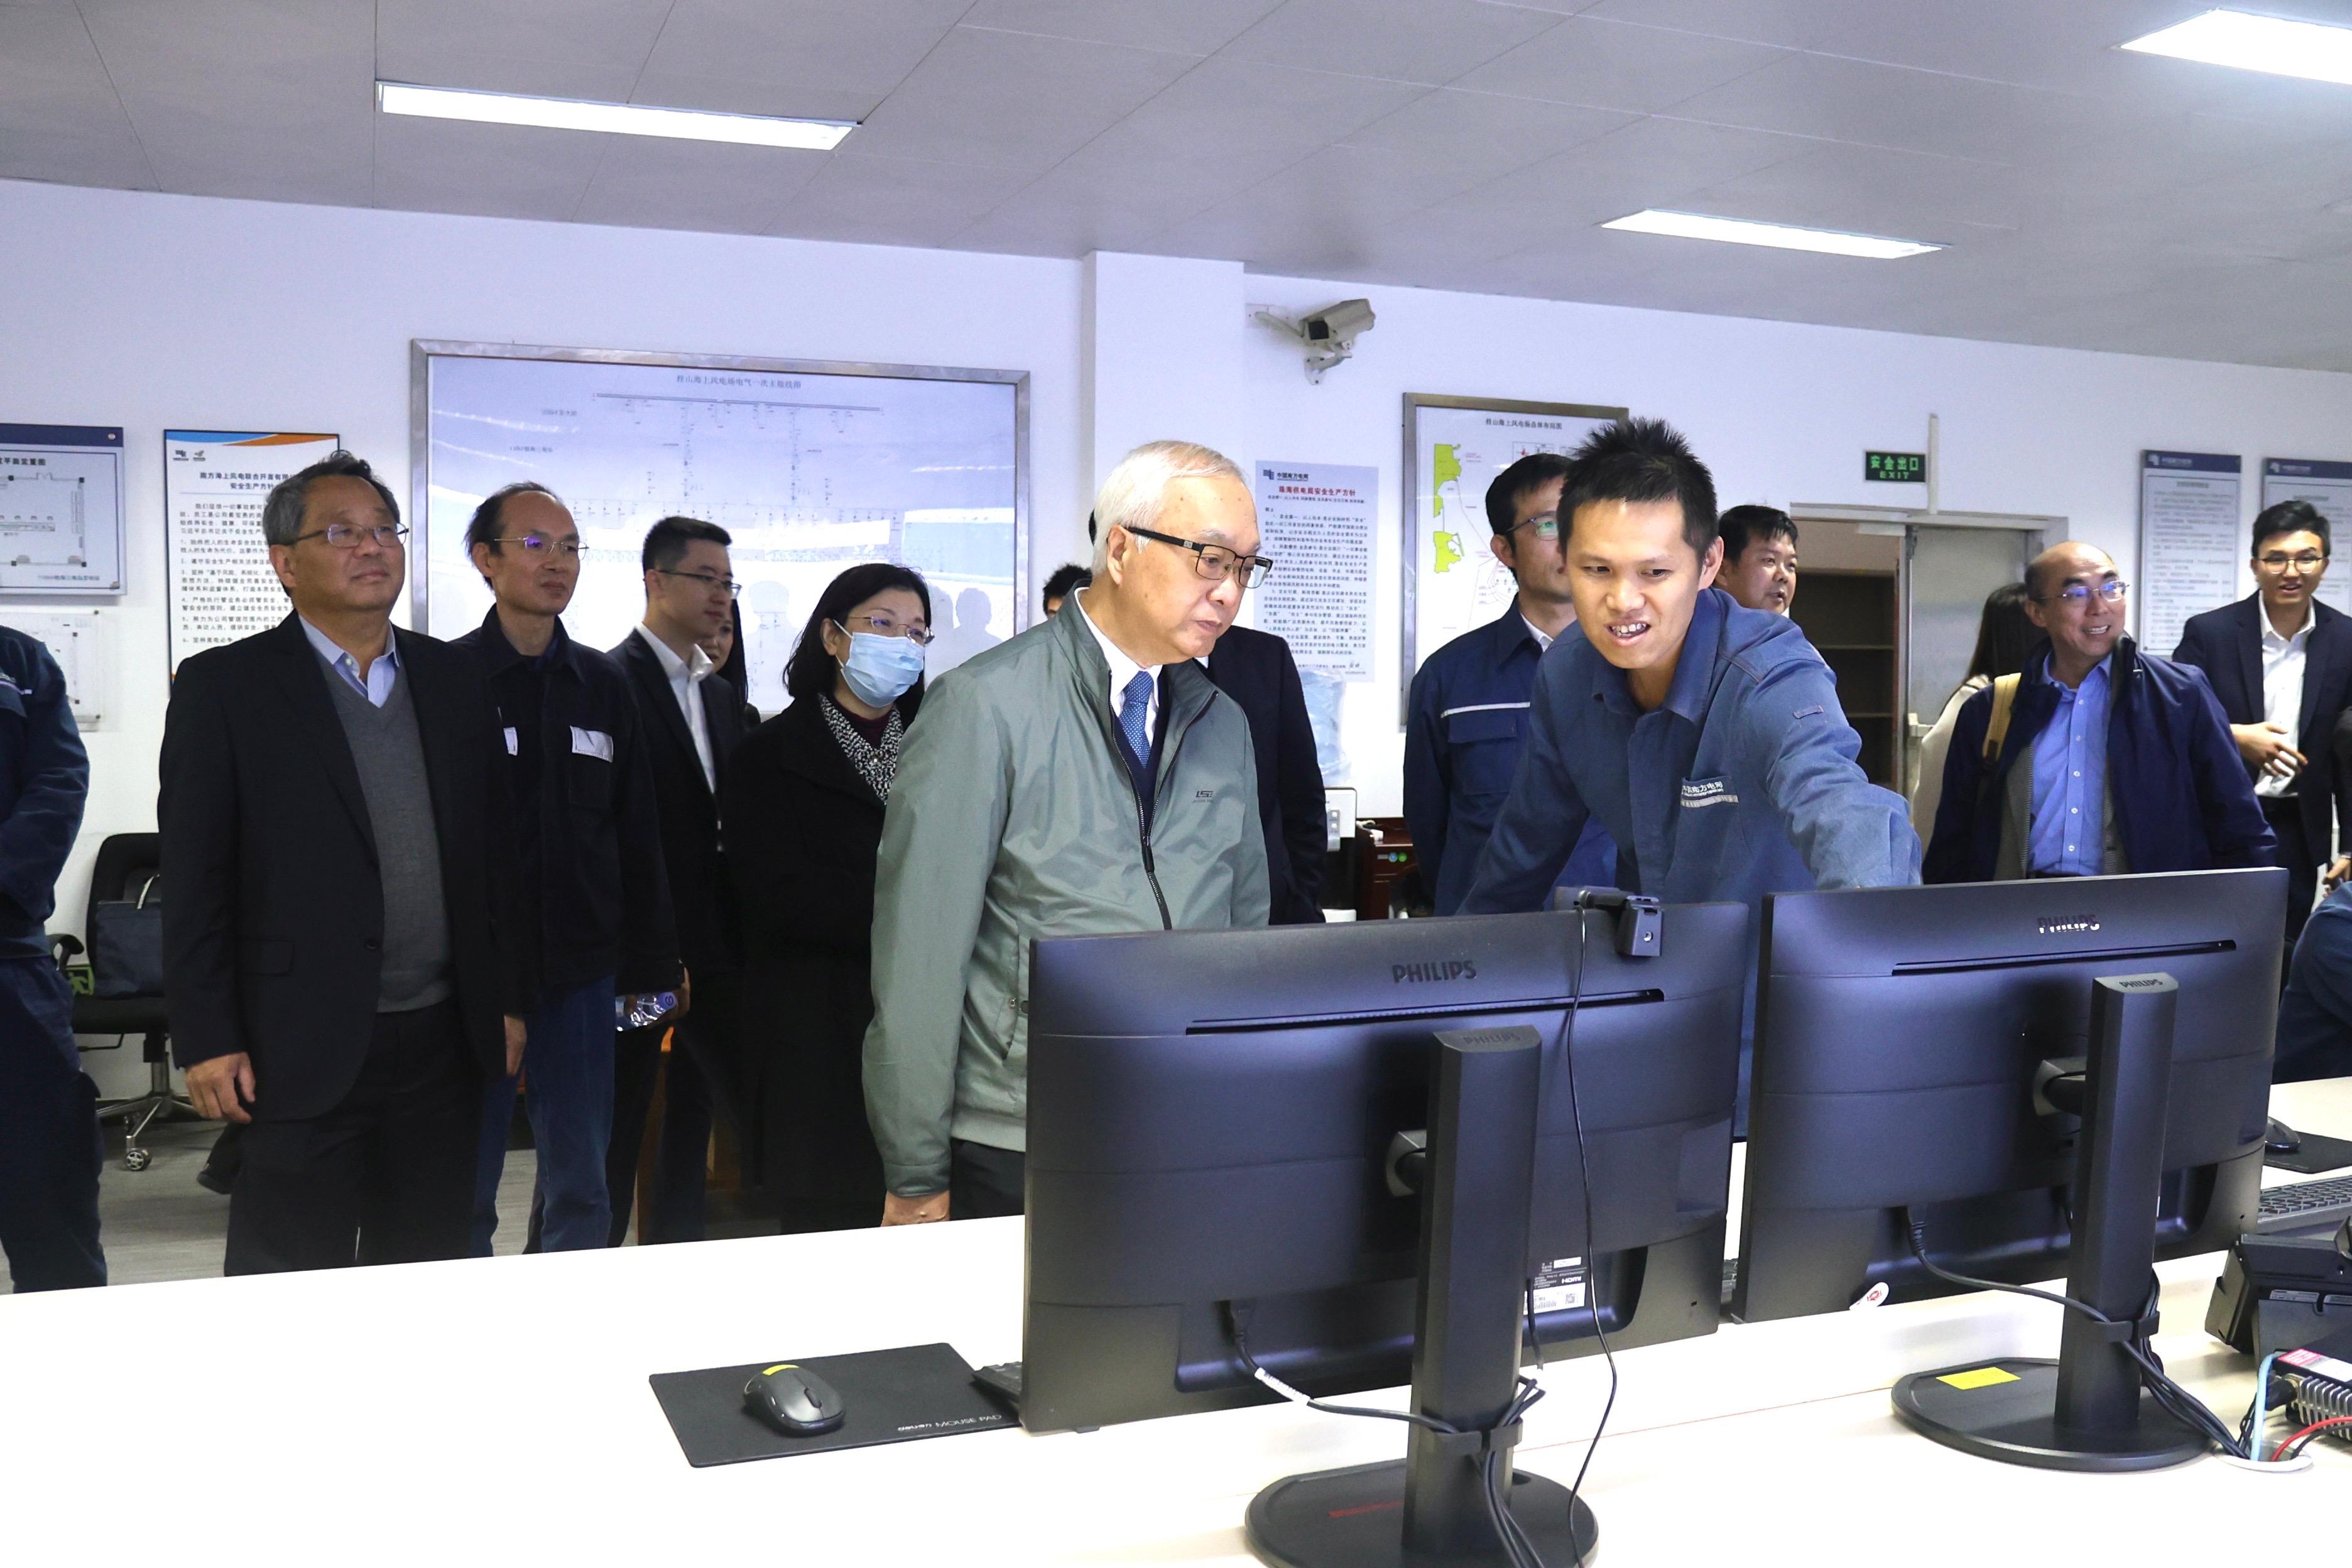 The Secretary for Environment and Ecology, Mr Tse Chin-wan, visited the energy facilities of the China Southern Power Grid in Zhuhai and Nansha, Guangzhou, in the Guangdong-Hong Kong-Macao Greater Bay Area today (March 7). Photo shows Mr Tse (left) touring the Guishan Offshore Wind Farm in the morning and being briefed by a representative in the control room on the development background and operation of the facilities.